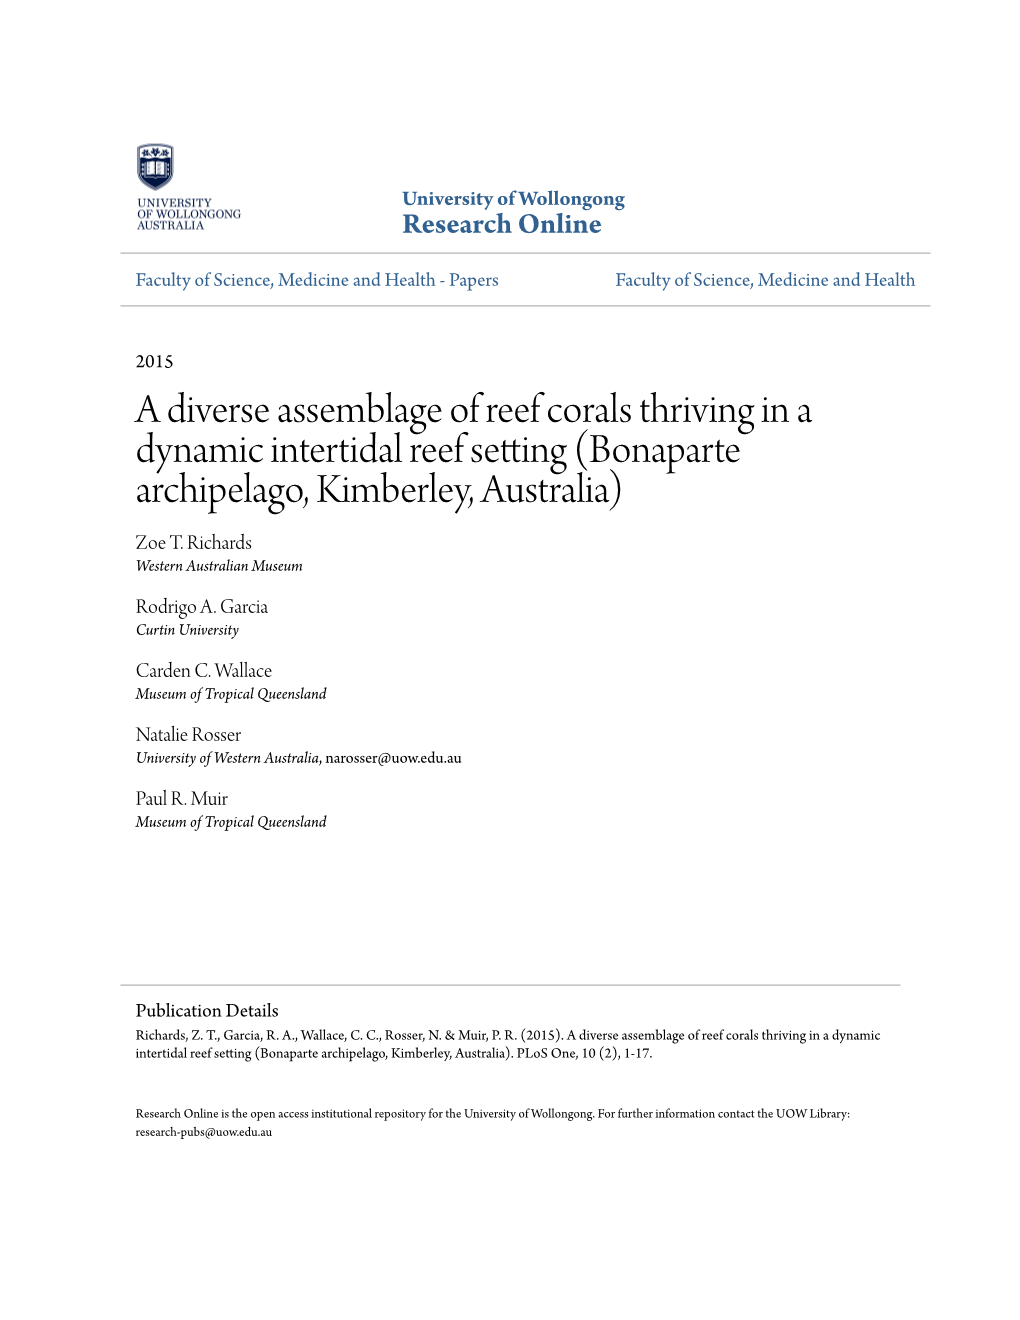 A Diverse Assemblage of Reef Corals Thriving in a Dynamic Intertidal Reef Setting (Bonaparte Archipelago, Kimberley, Australia) Zoe T